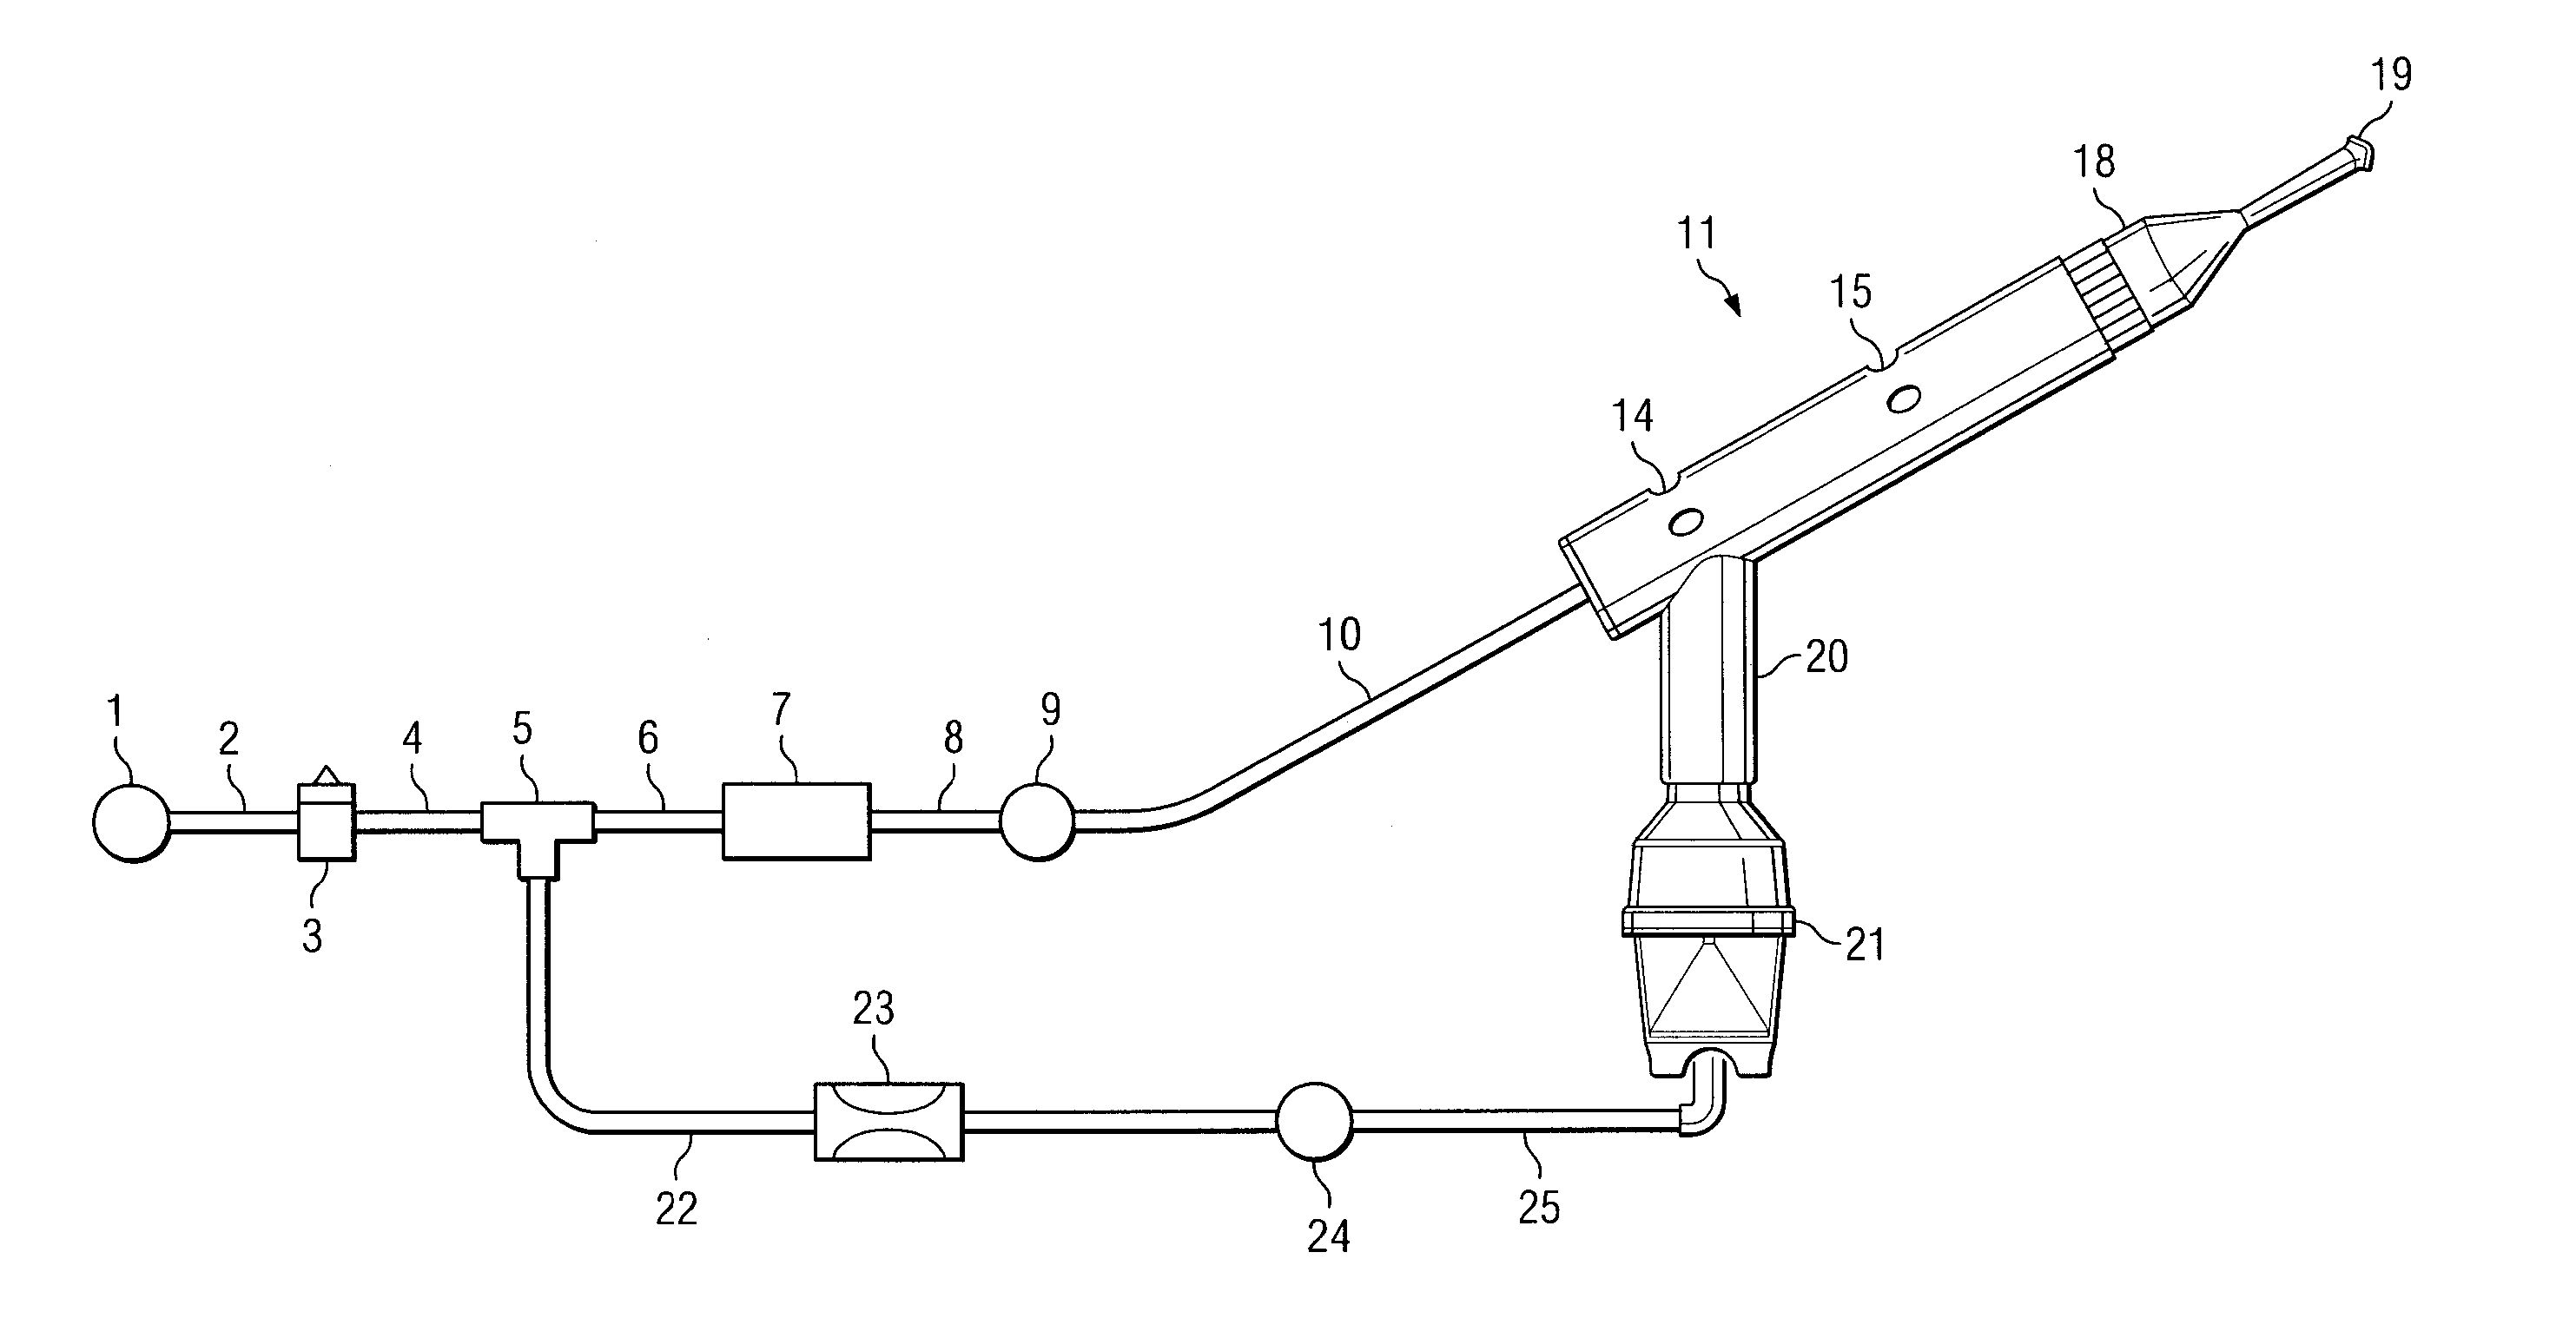 Continuous high-frequency oscillation breathing treatment apparatus